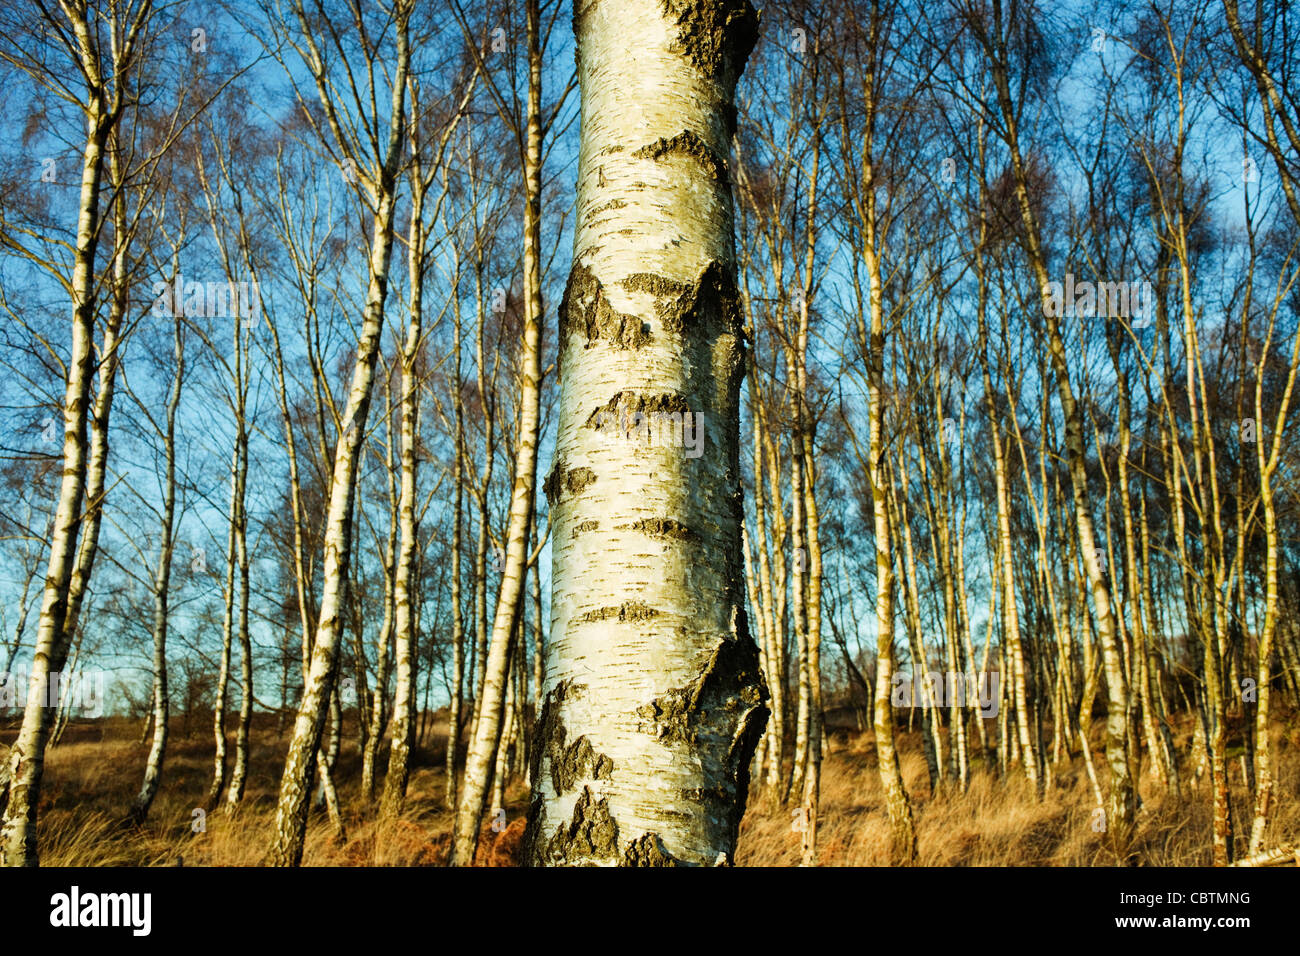 Silver birch trees in woodland on Iping Common, West Sussex, England on a fine sunny day with foreground bark detail Stock Photo